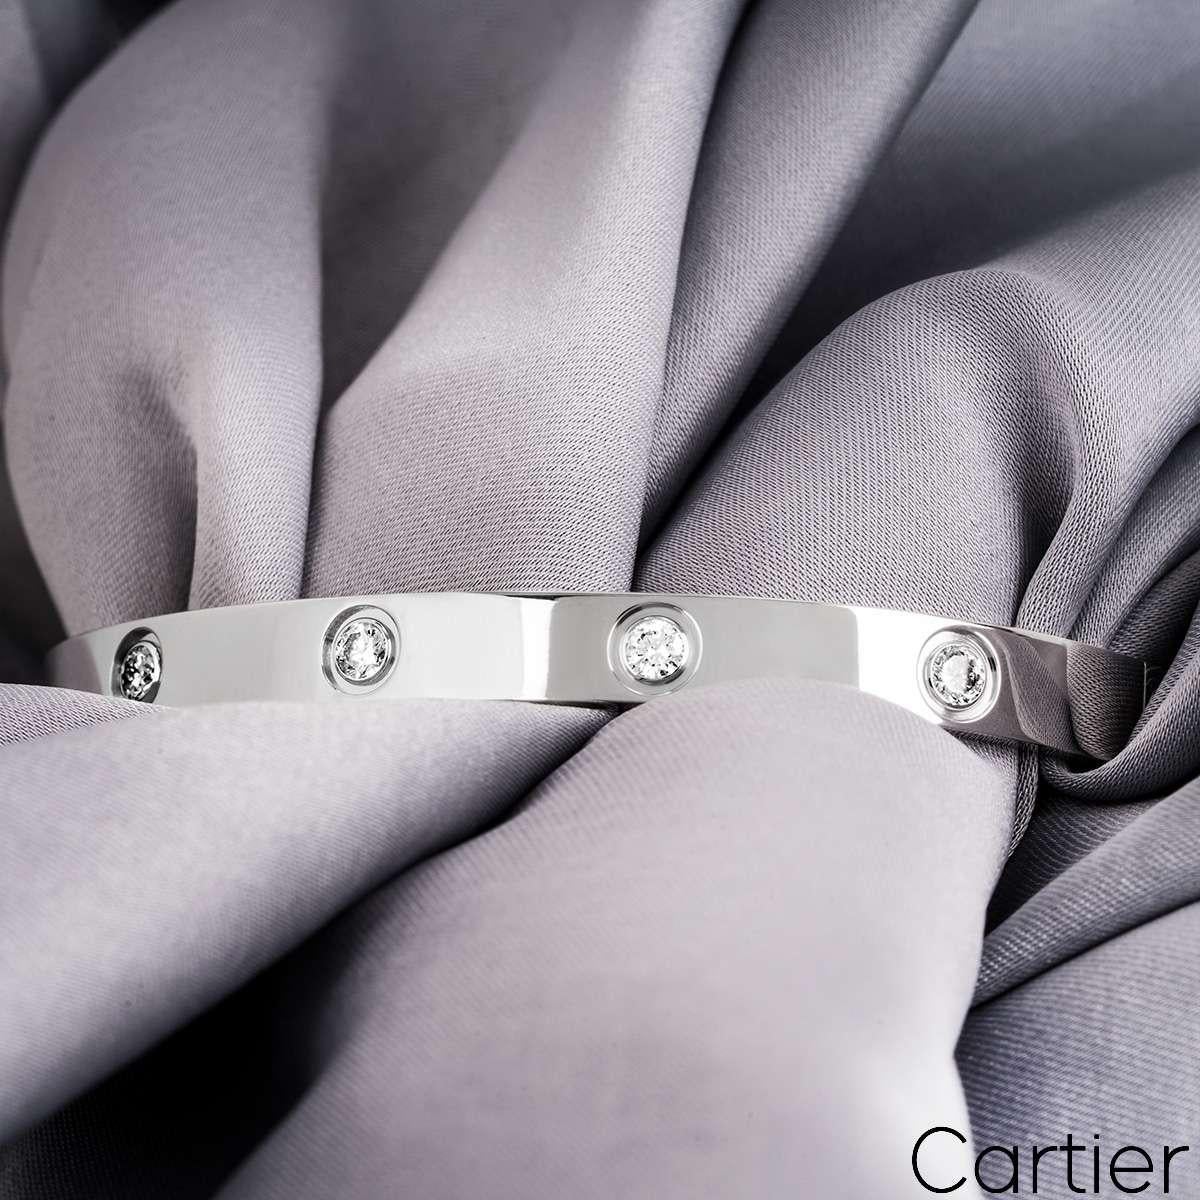 Cartier White Gold Full Diamond Love Bracelet Size 18 B6040718 In Excellent Condition For Sale In London, GB